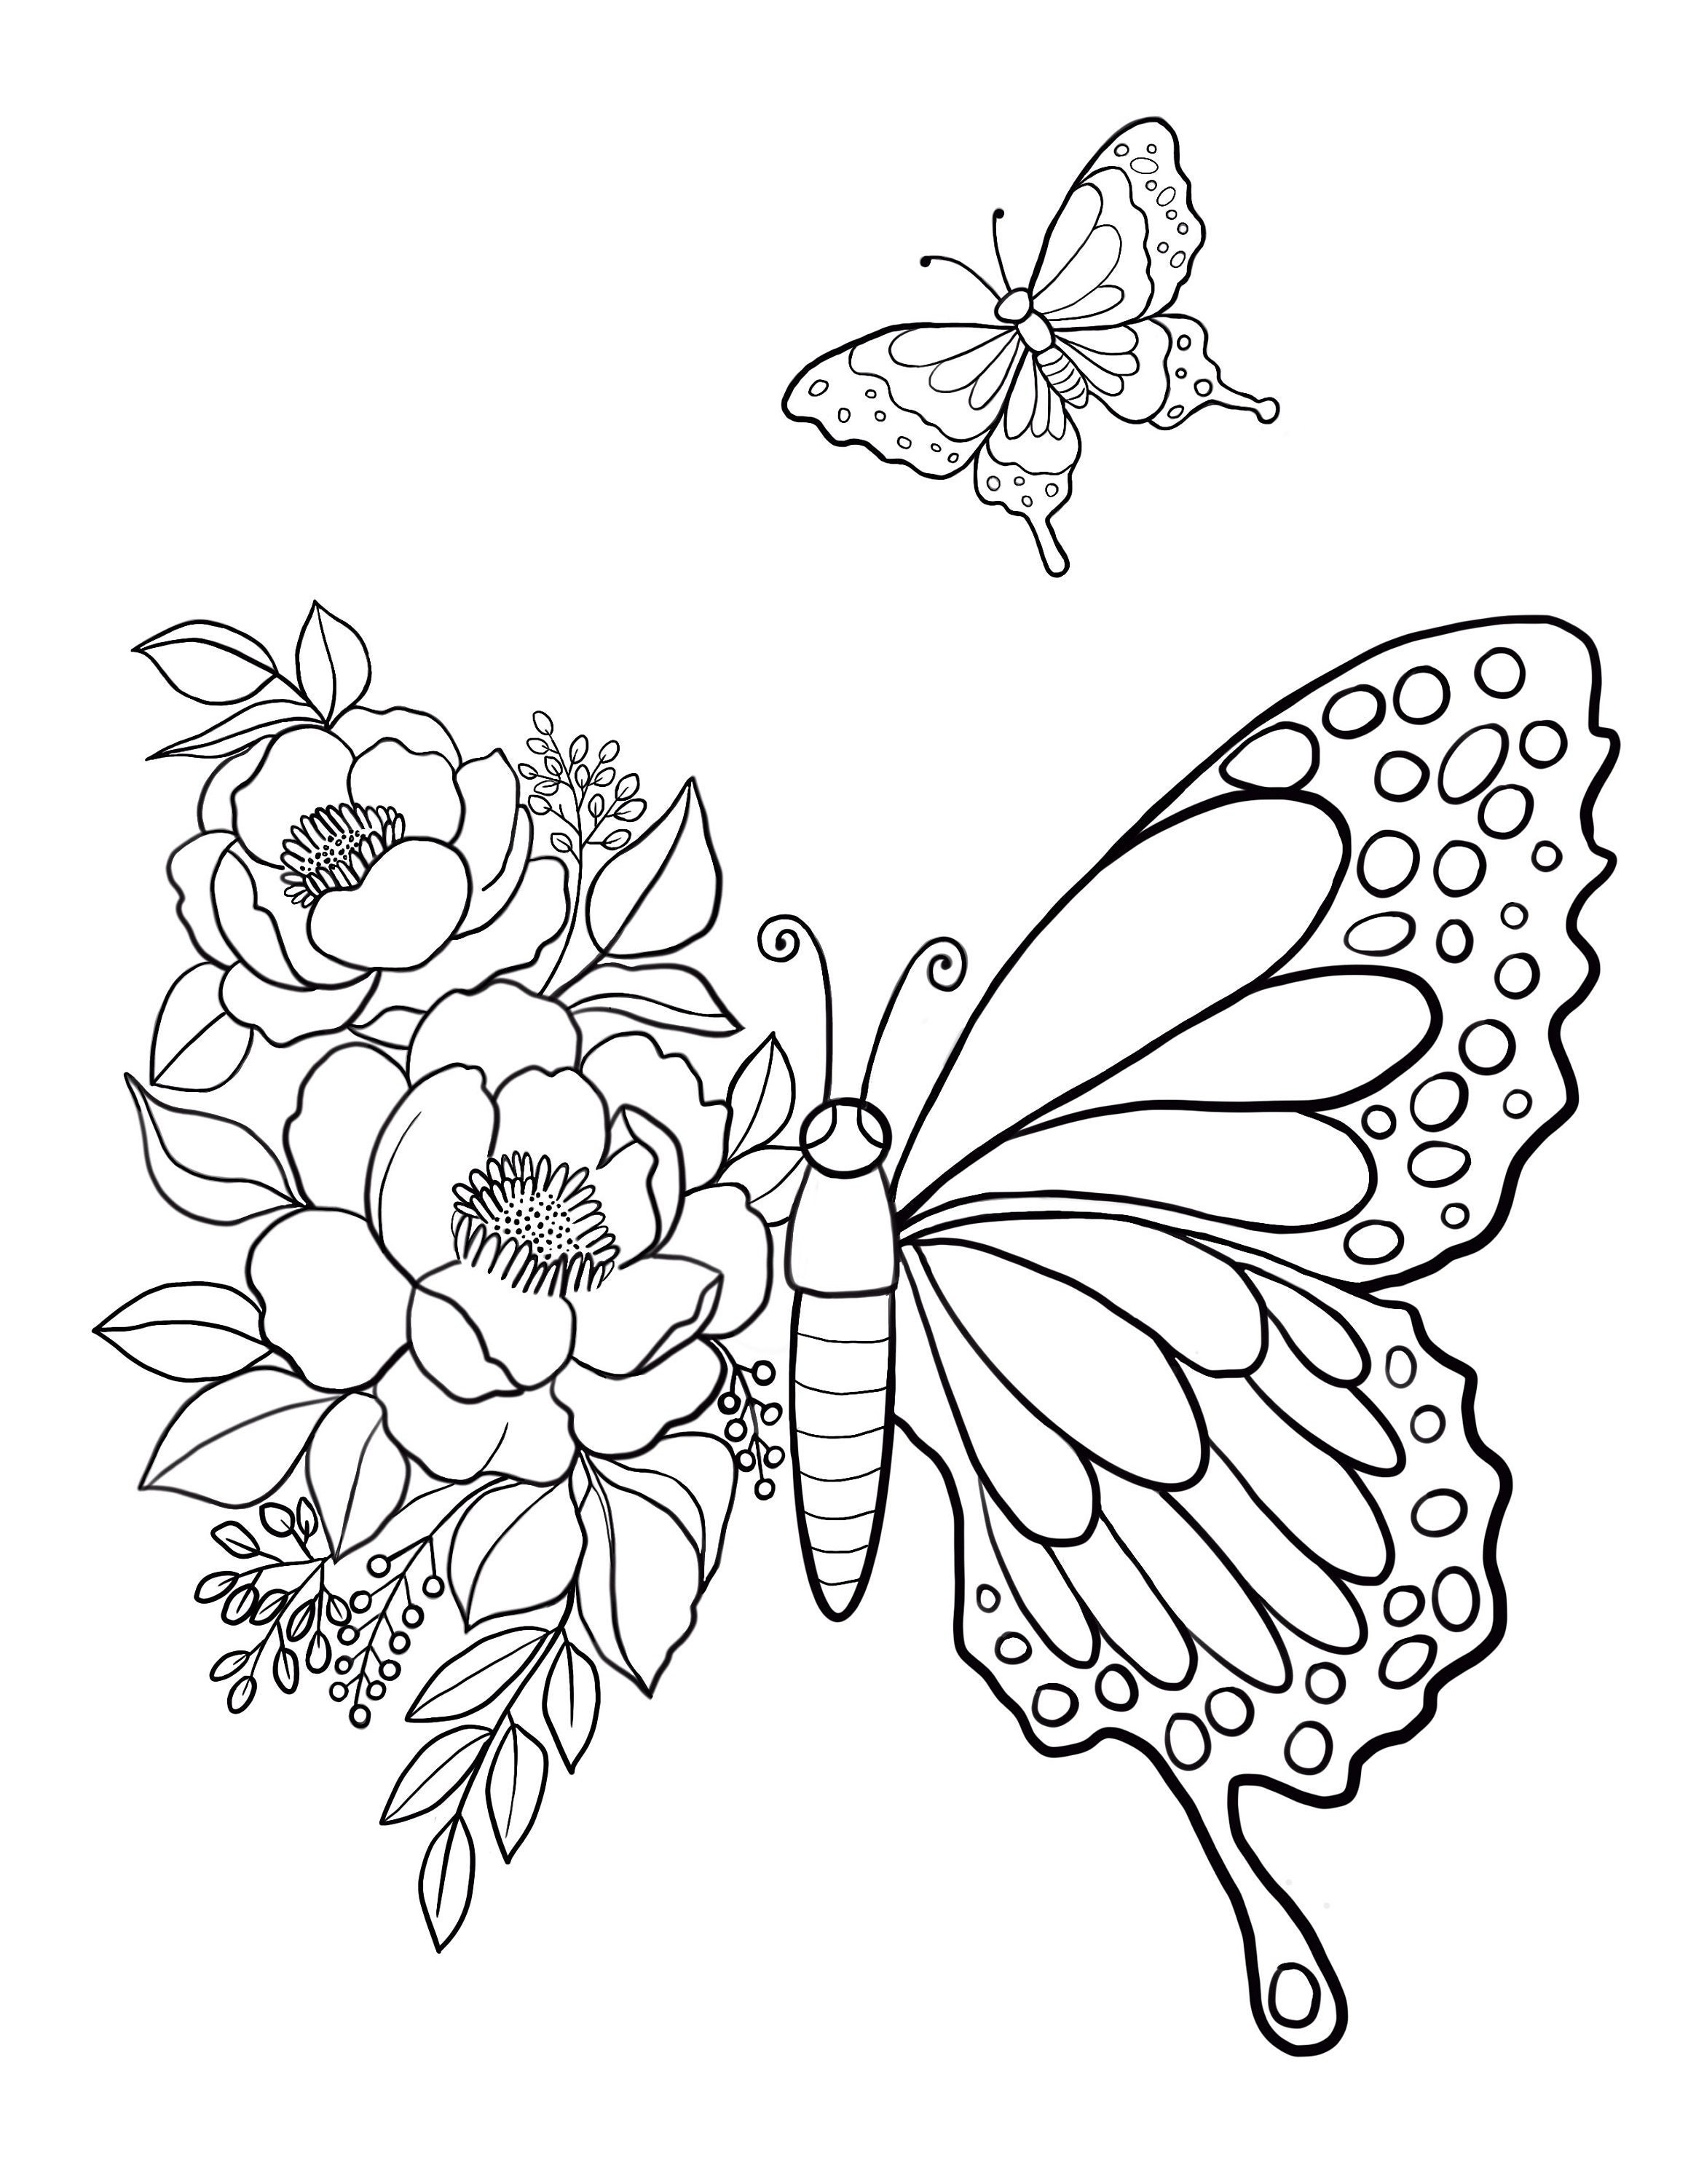 Butterfly printable coloring sheet coloring pages kids coloring pages kids summer activity butterfly pictures